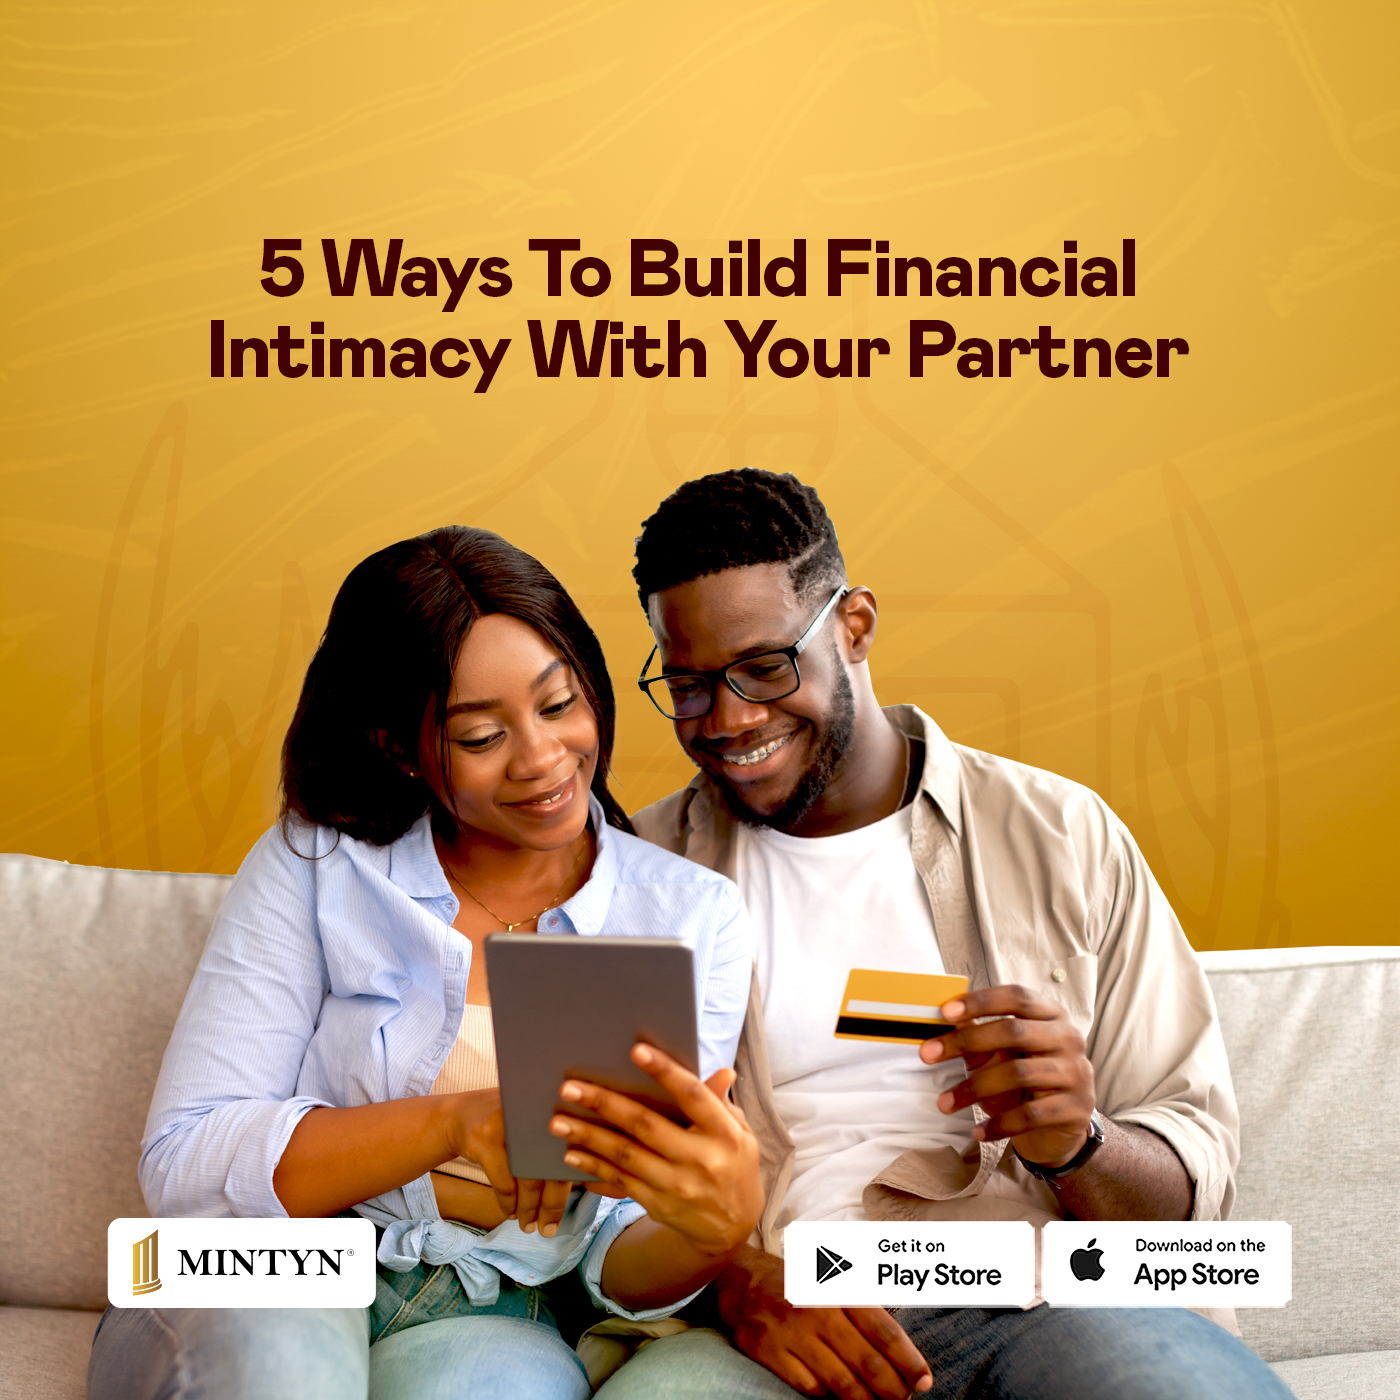 5 Ways To Build Financial Intimacy With Your Partner